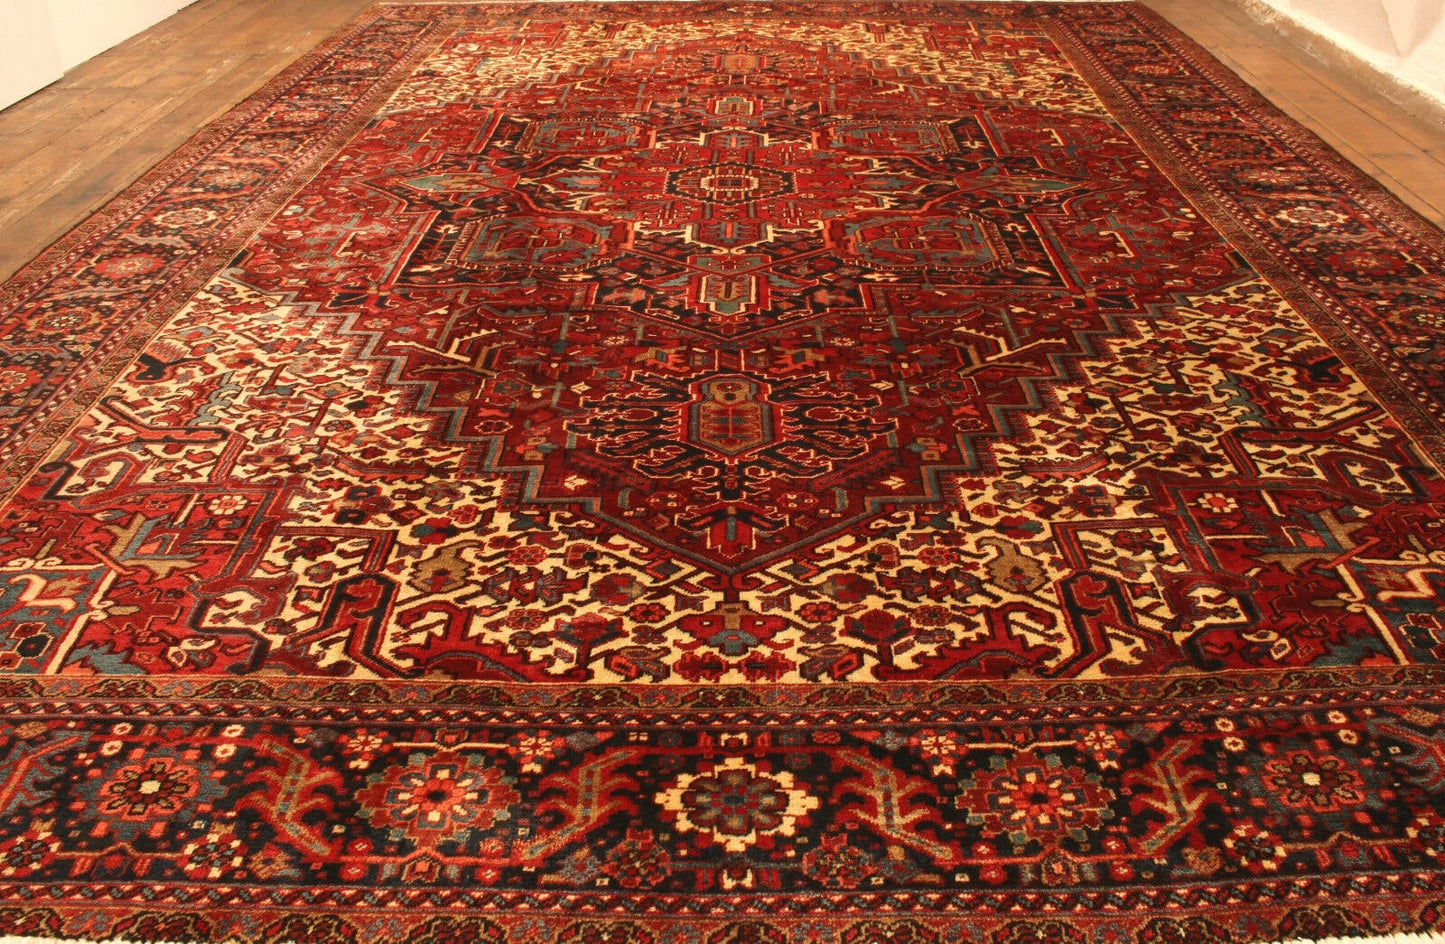 Side angle shot of the Handmade Vintage Persian Style Heriz Rug showcasing size and scale